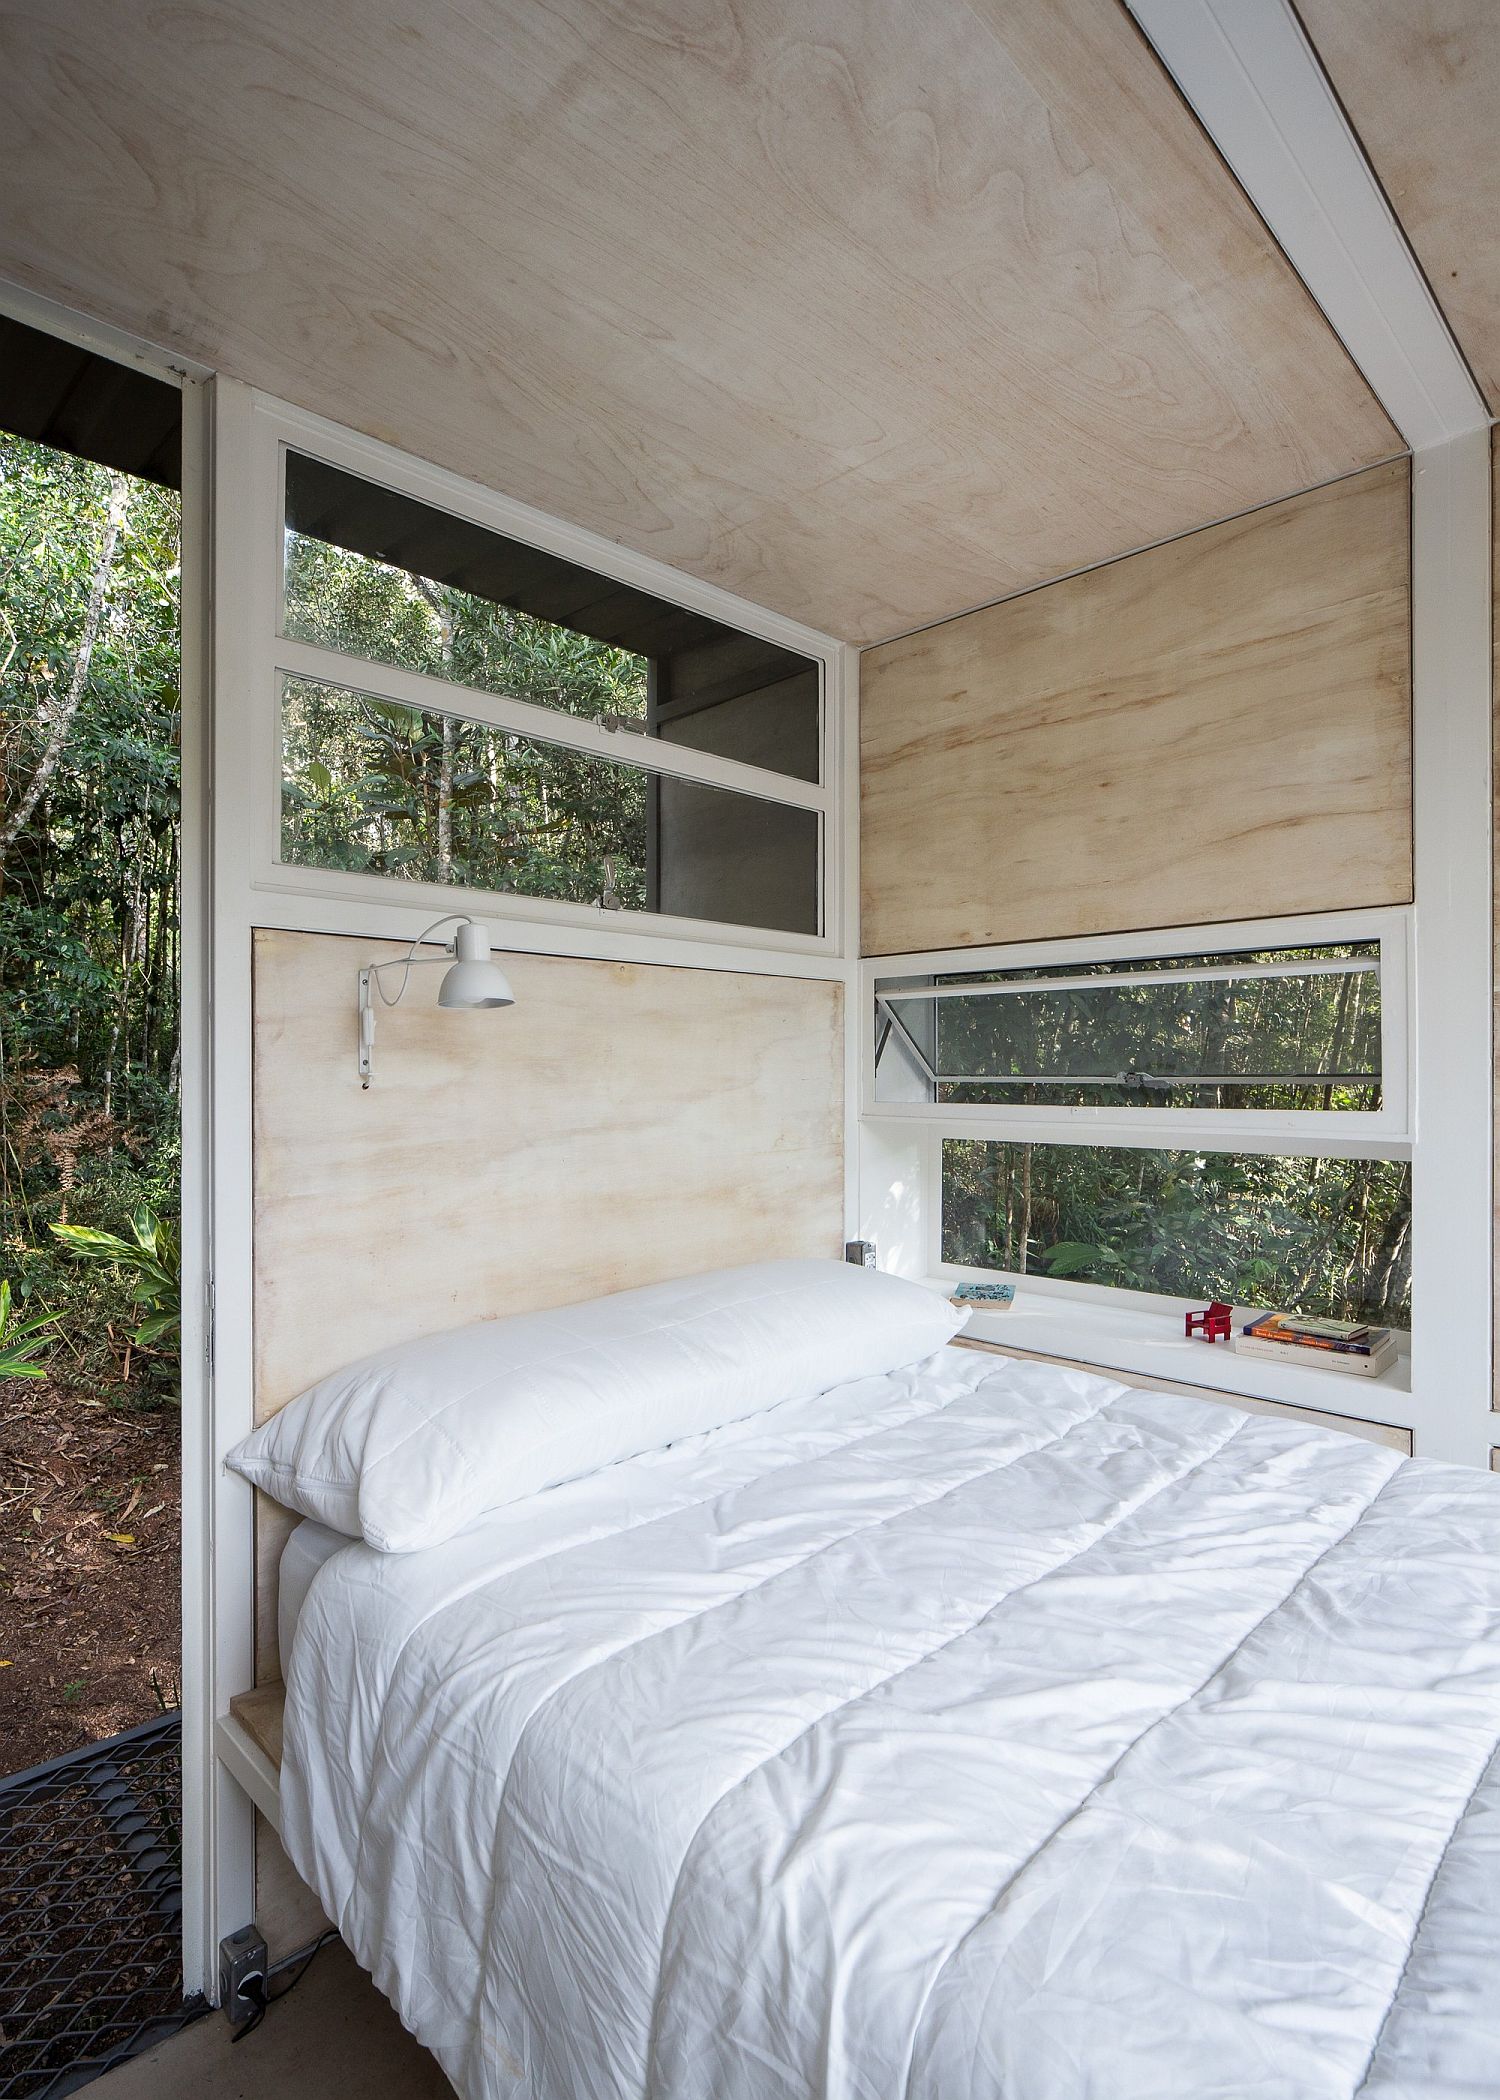 Wooden panels improve the acoustics of the cabin